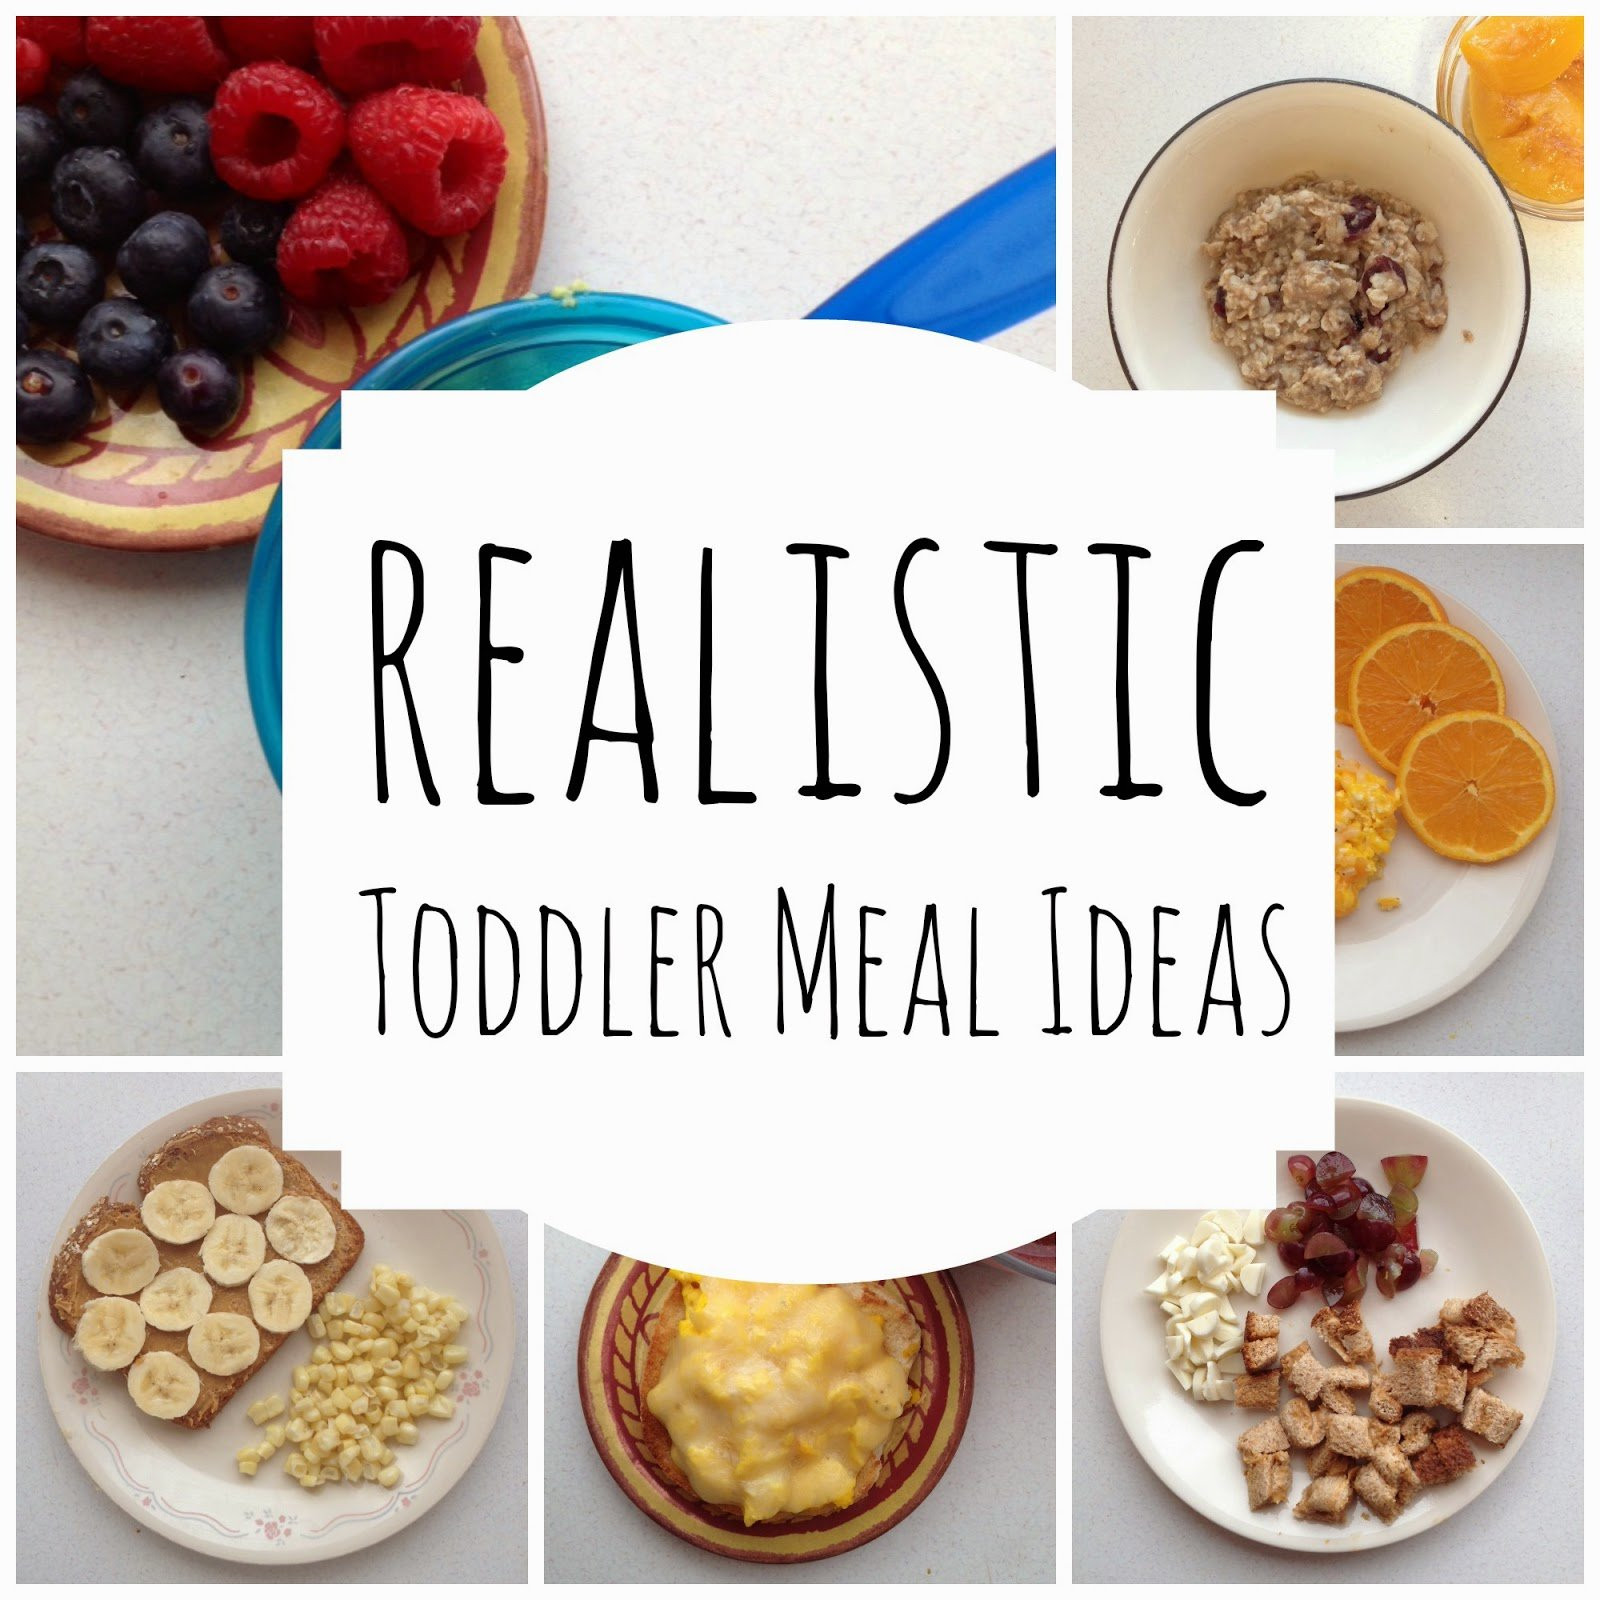 Baby Recipes 1 Year Old
 Realistic Toddler Meal Ideas Lou Lou Girls